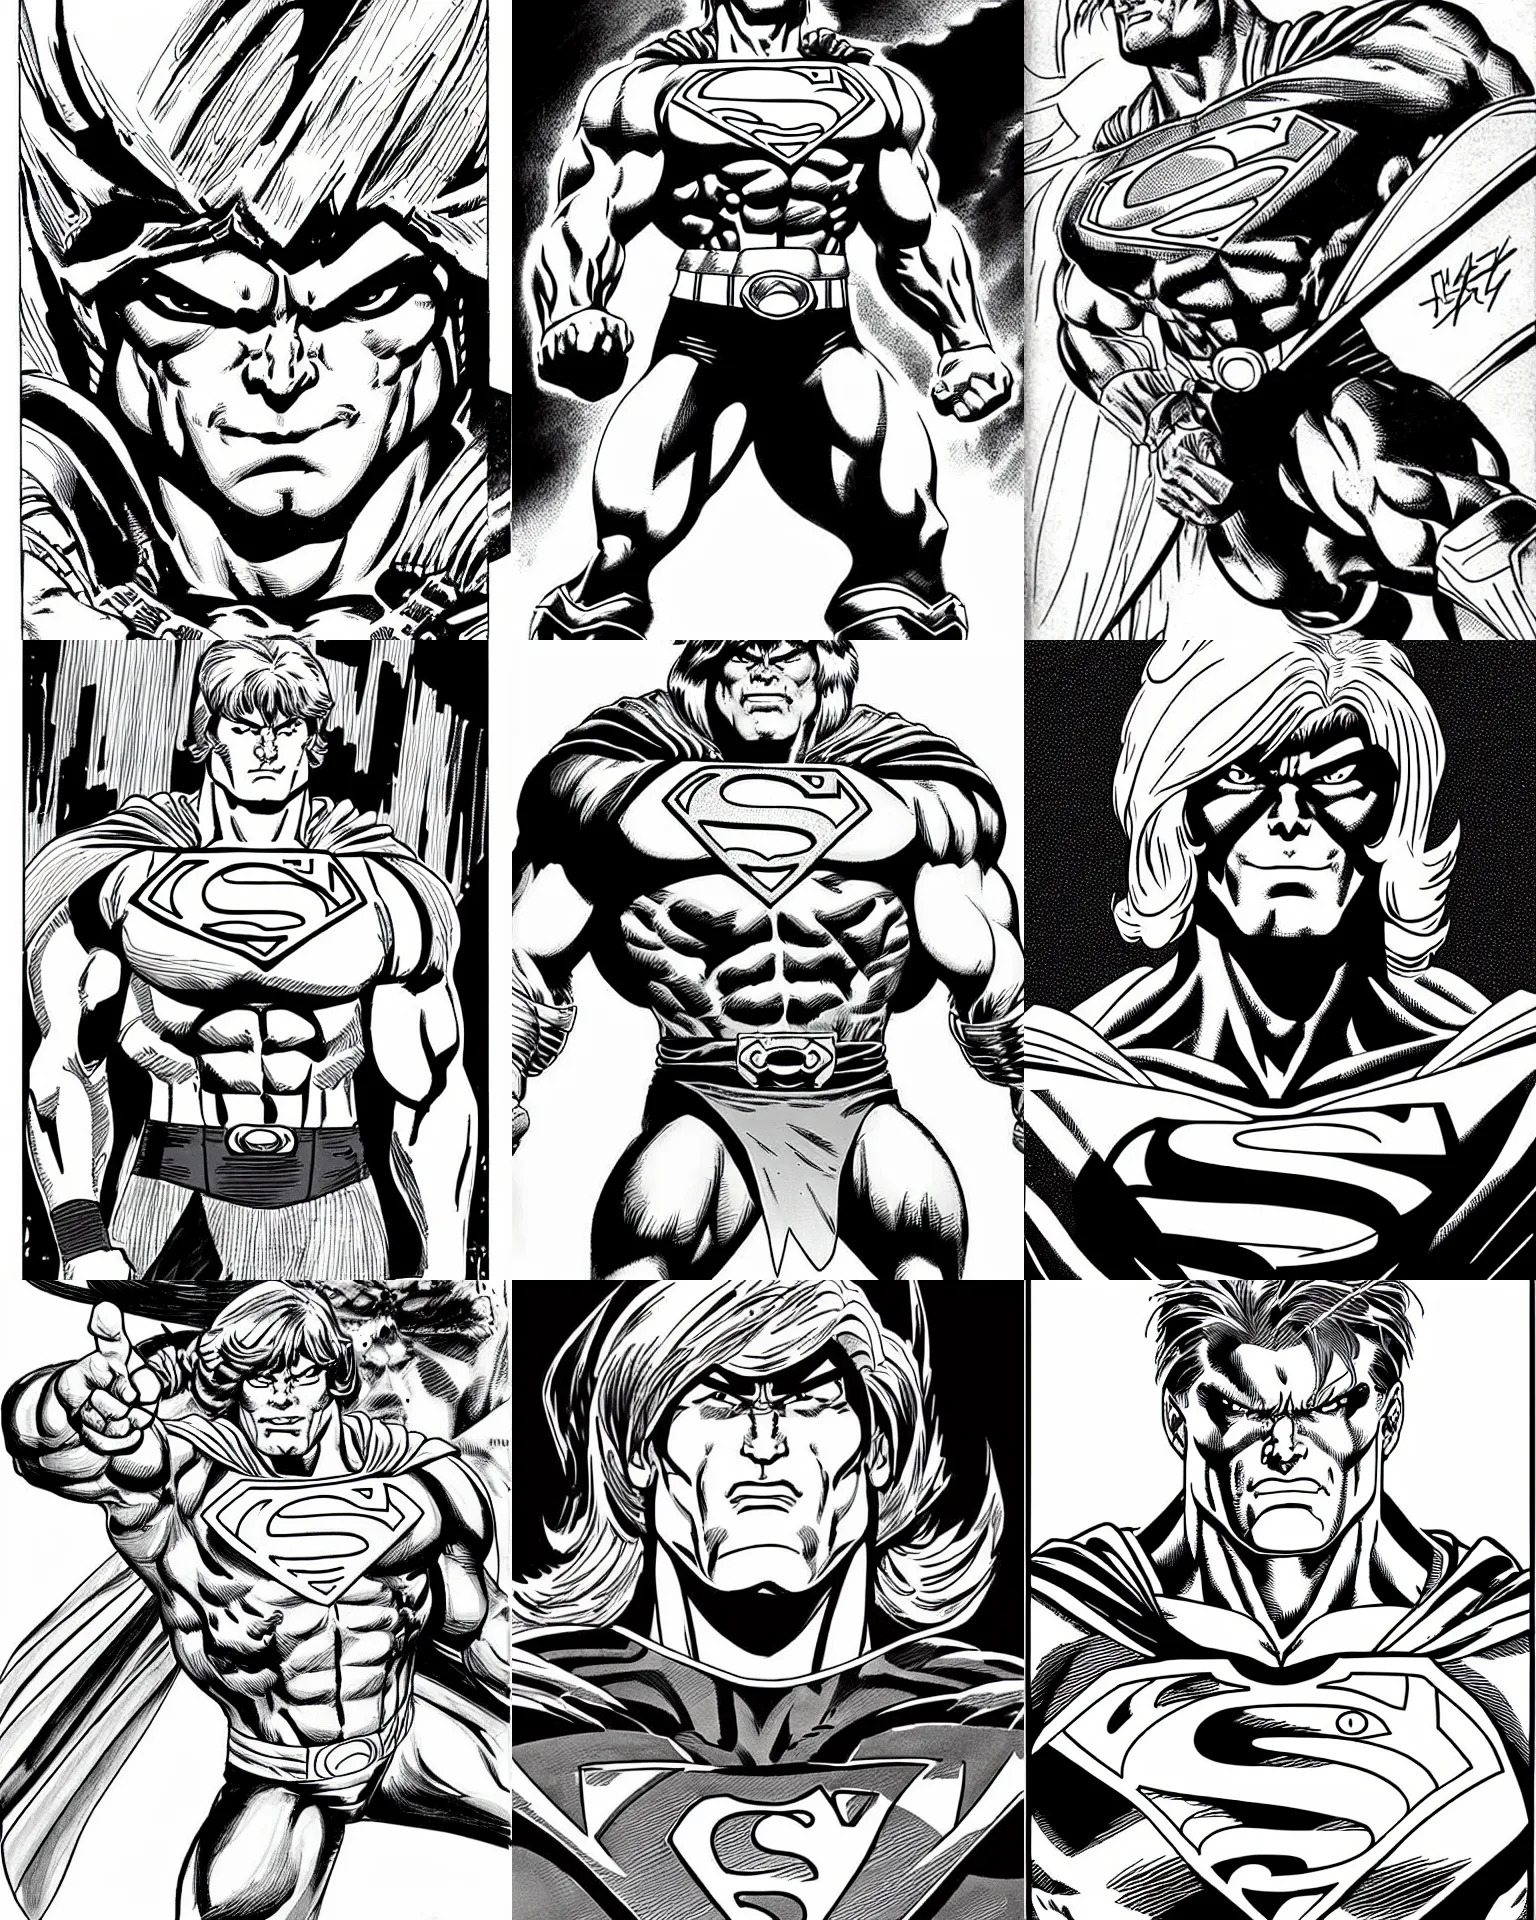 Prompt: he - man!!! jim lee!!! calm face shot!! flat ink sketch by jim lee face close up headshot superman costume in the style of jim lee, x - men superhero comic book character by jim lee